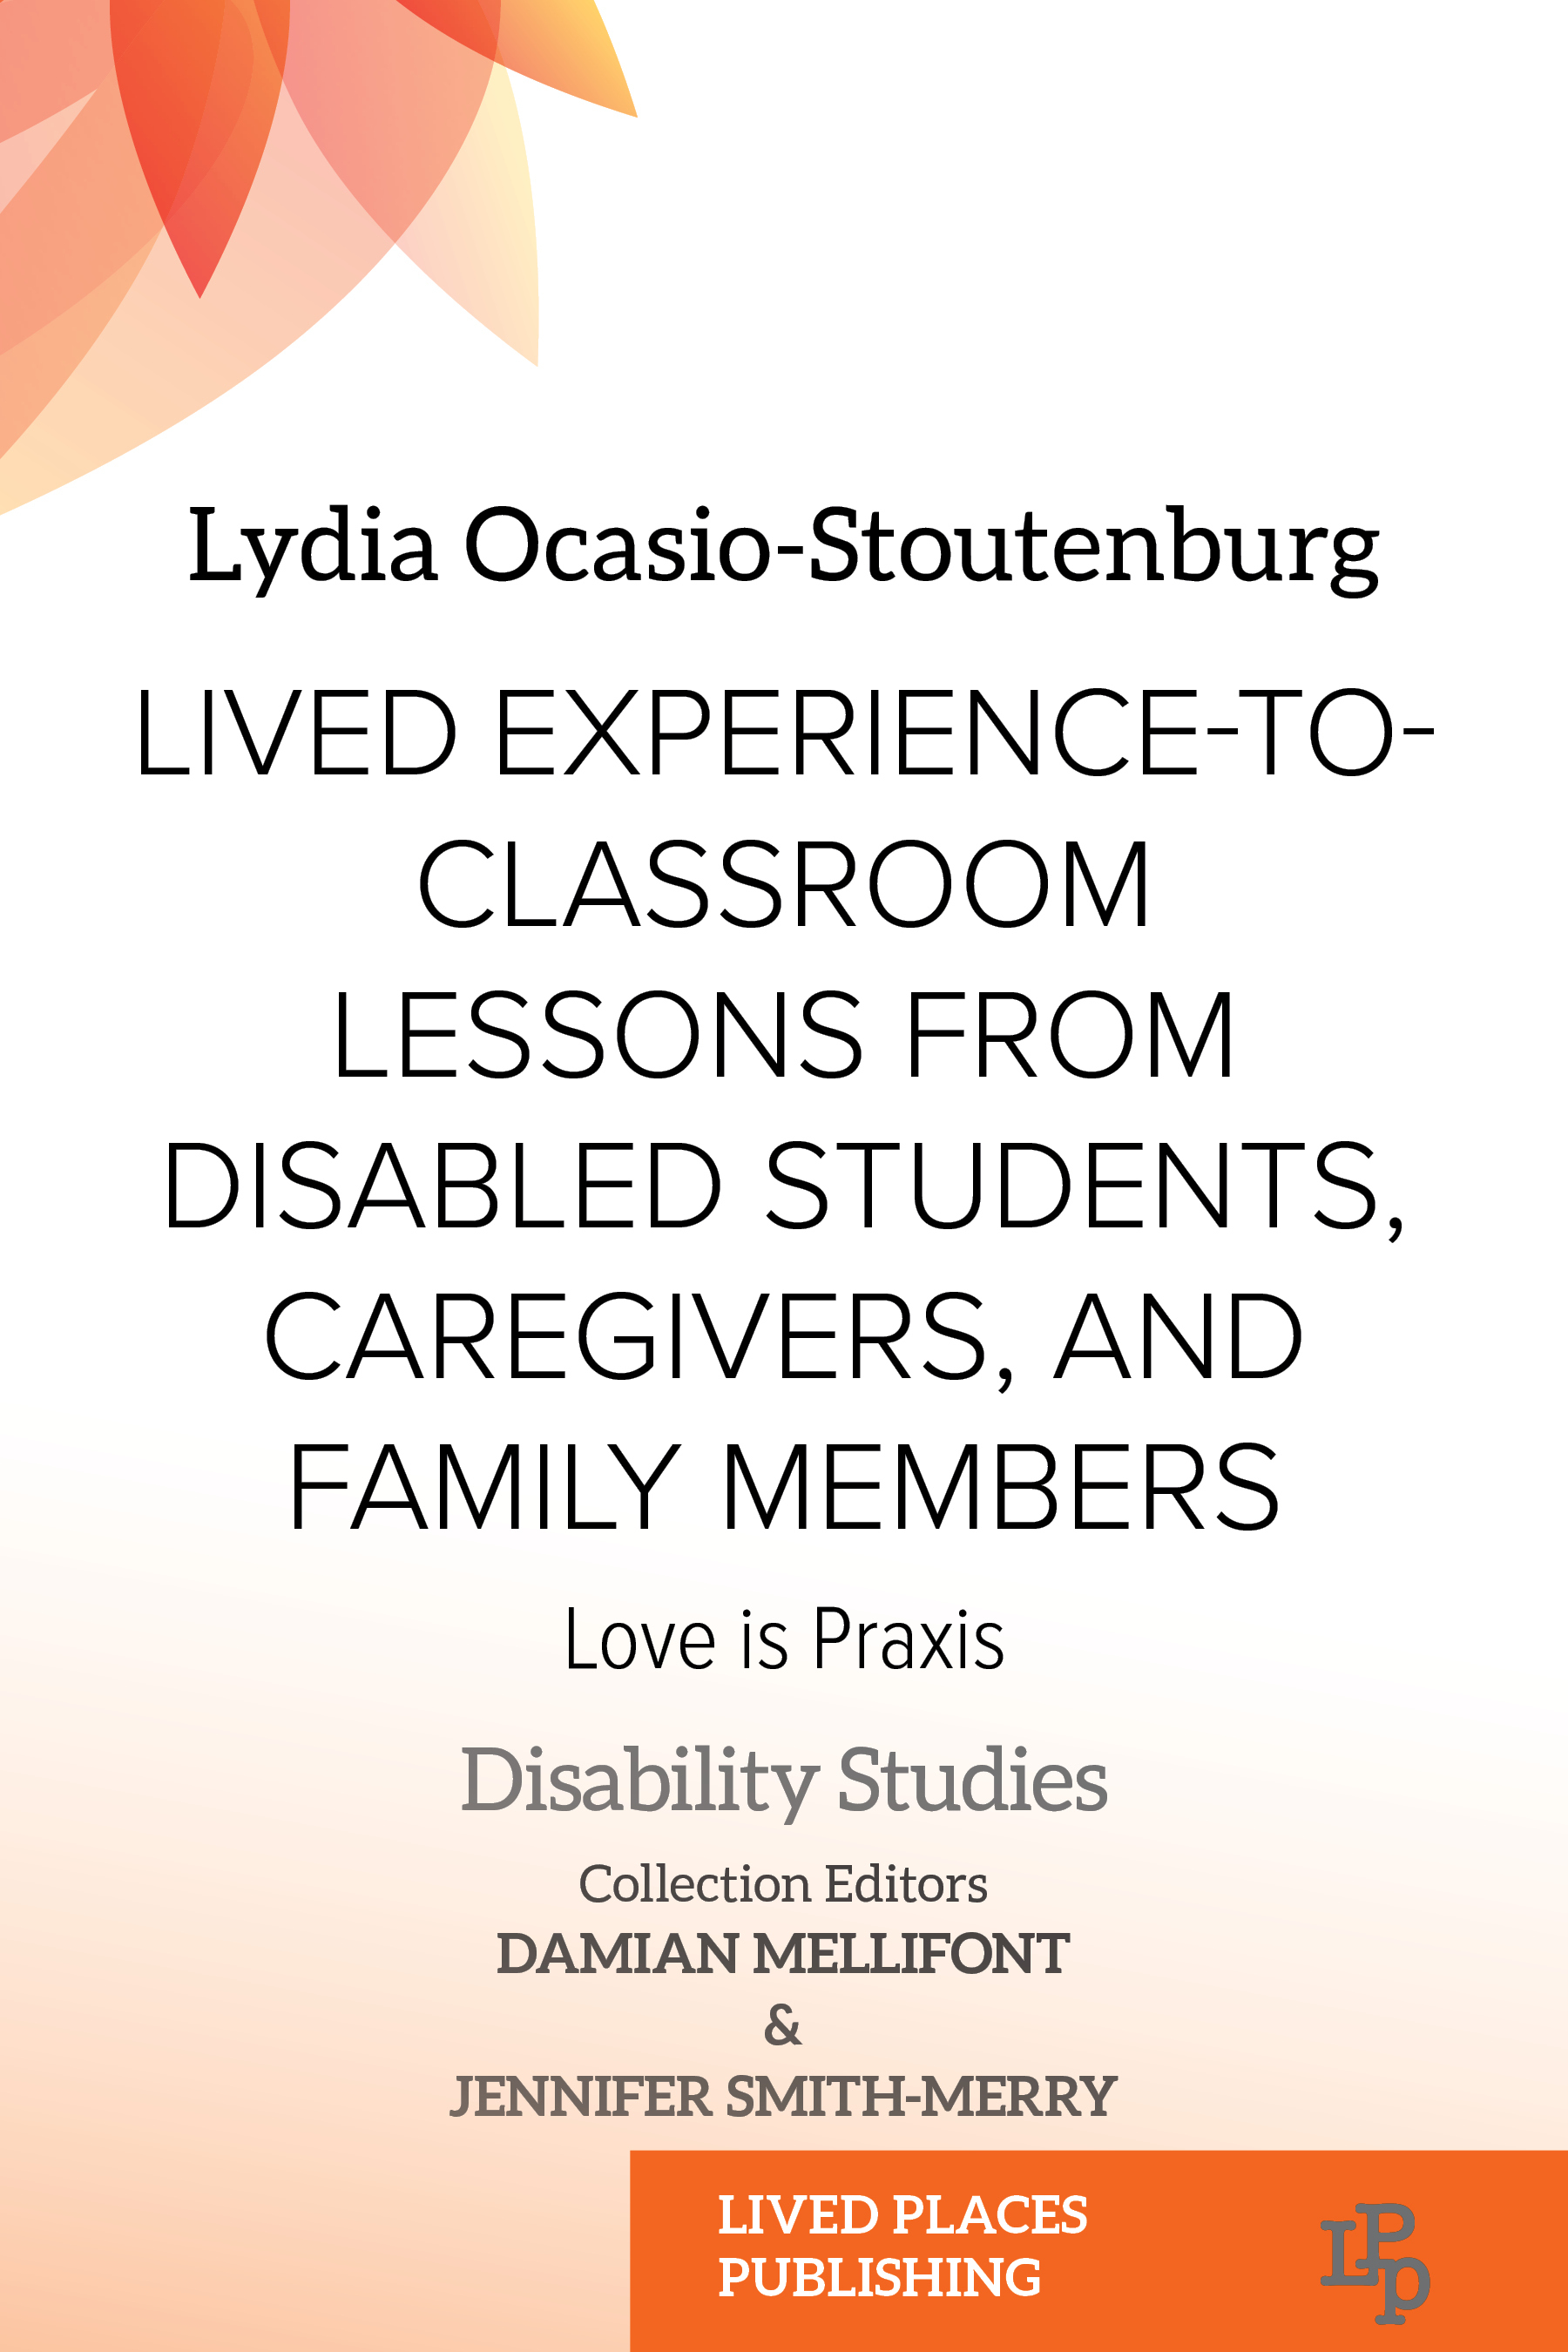 Lived Experience-to-Classroom Lessons from Disabled Students, Caregivers, and Family Members